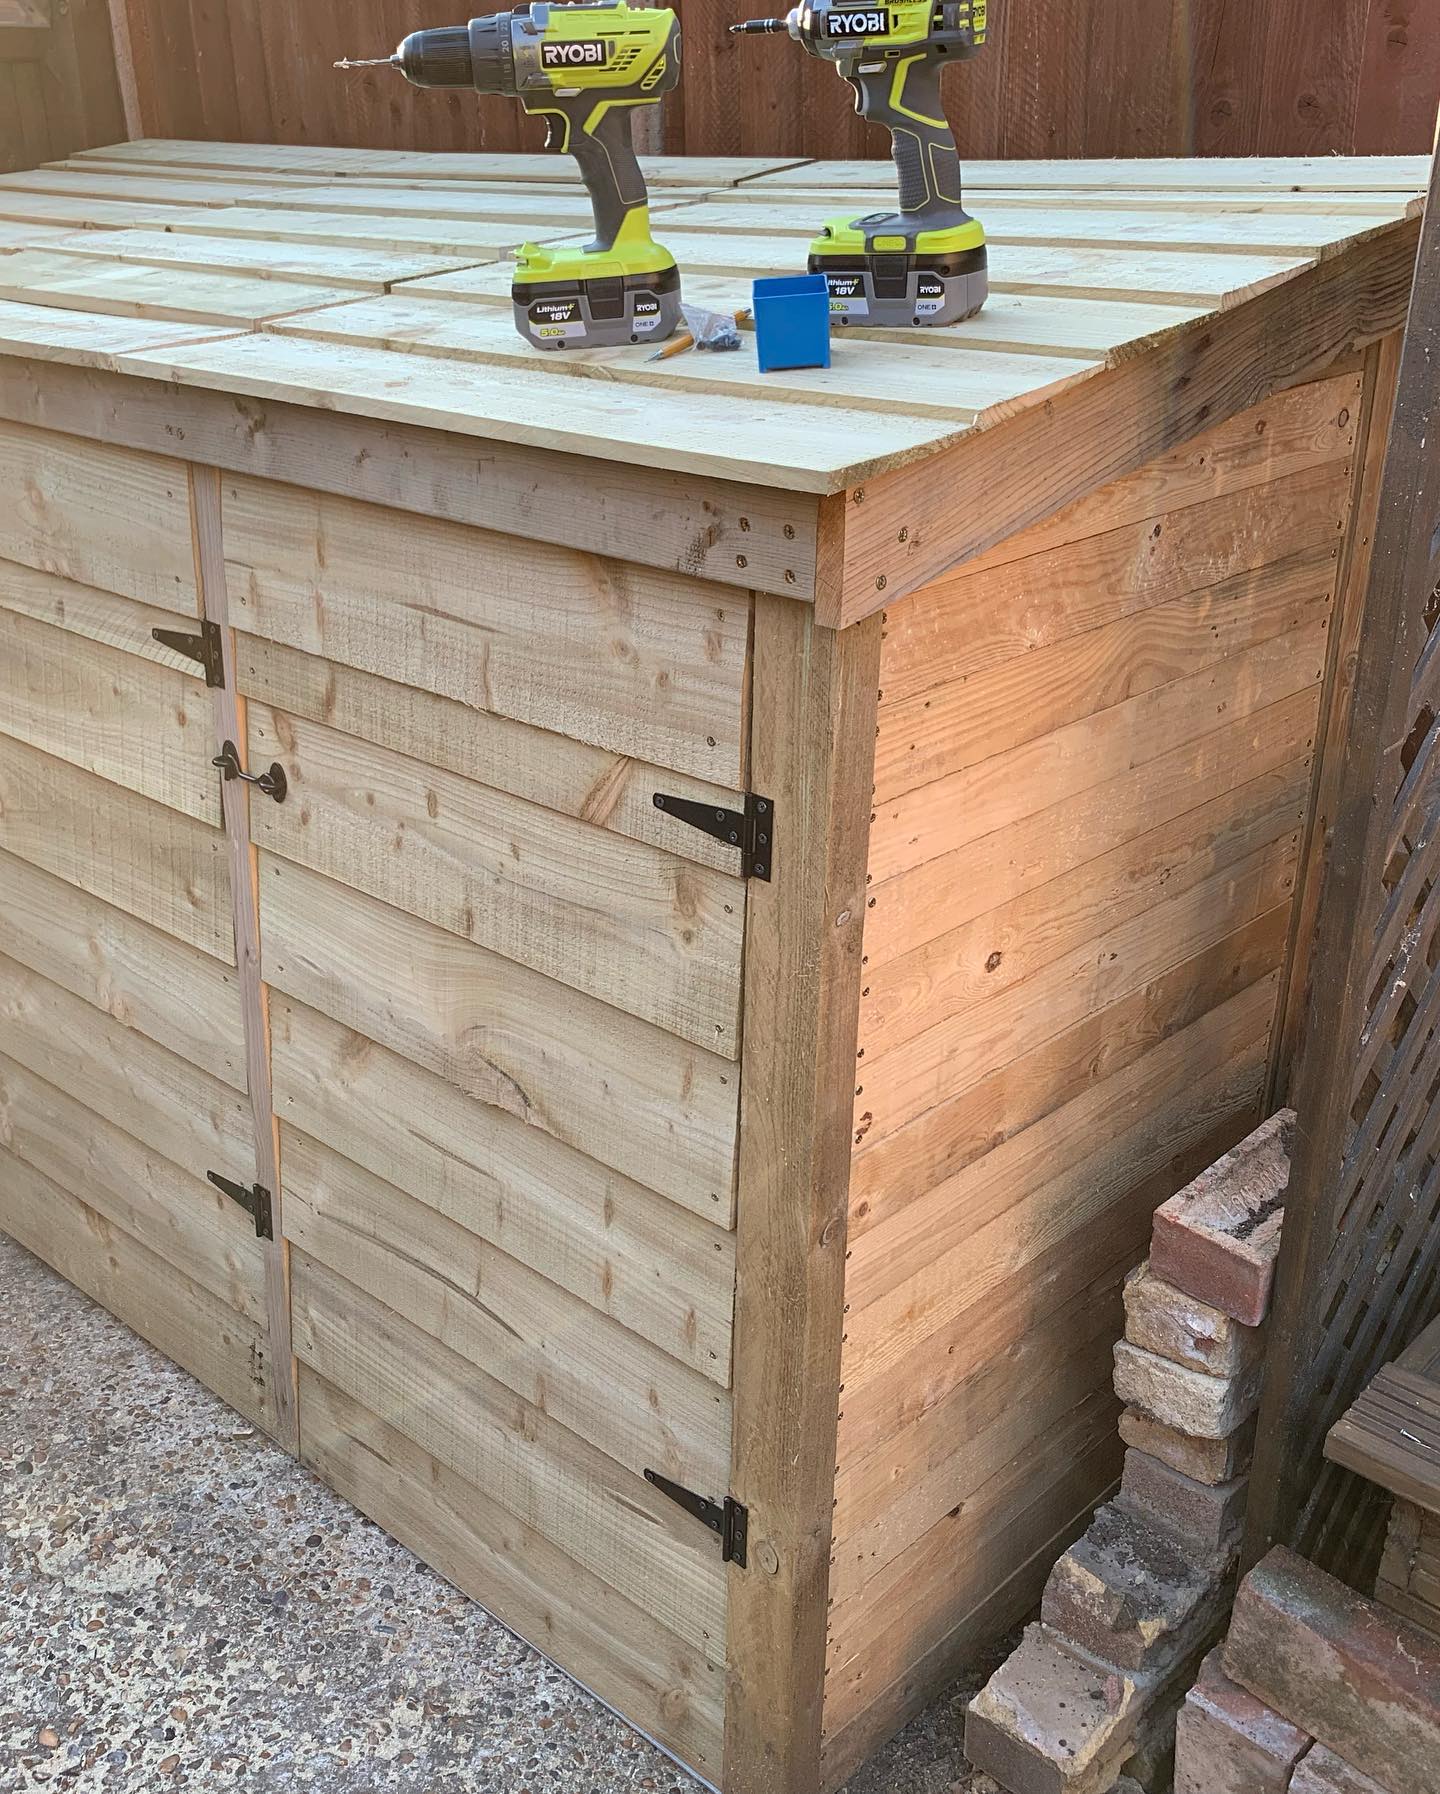 Finally finished my bin store project, mainly from pallet wood and other bits I had left over from other stuff…
 
#palletproject #palletwood #ryobiuk #ryobitoolseu #ryobimade #binstore #gardendiy